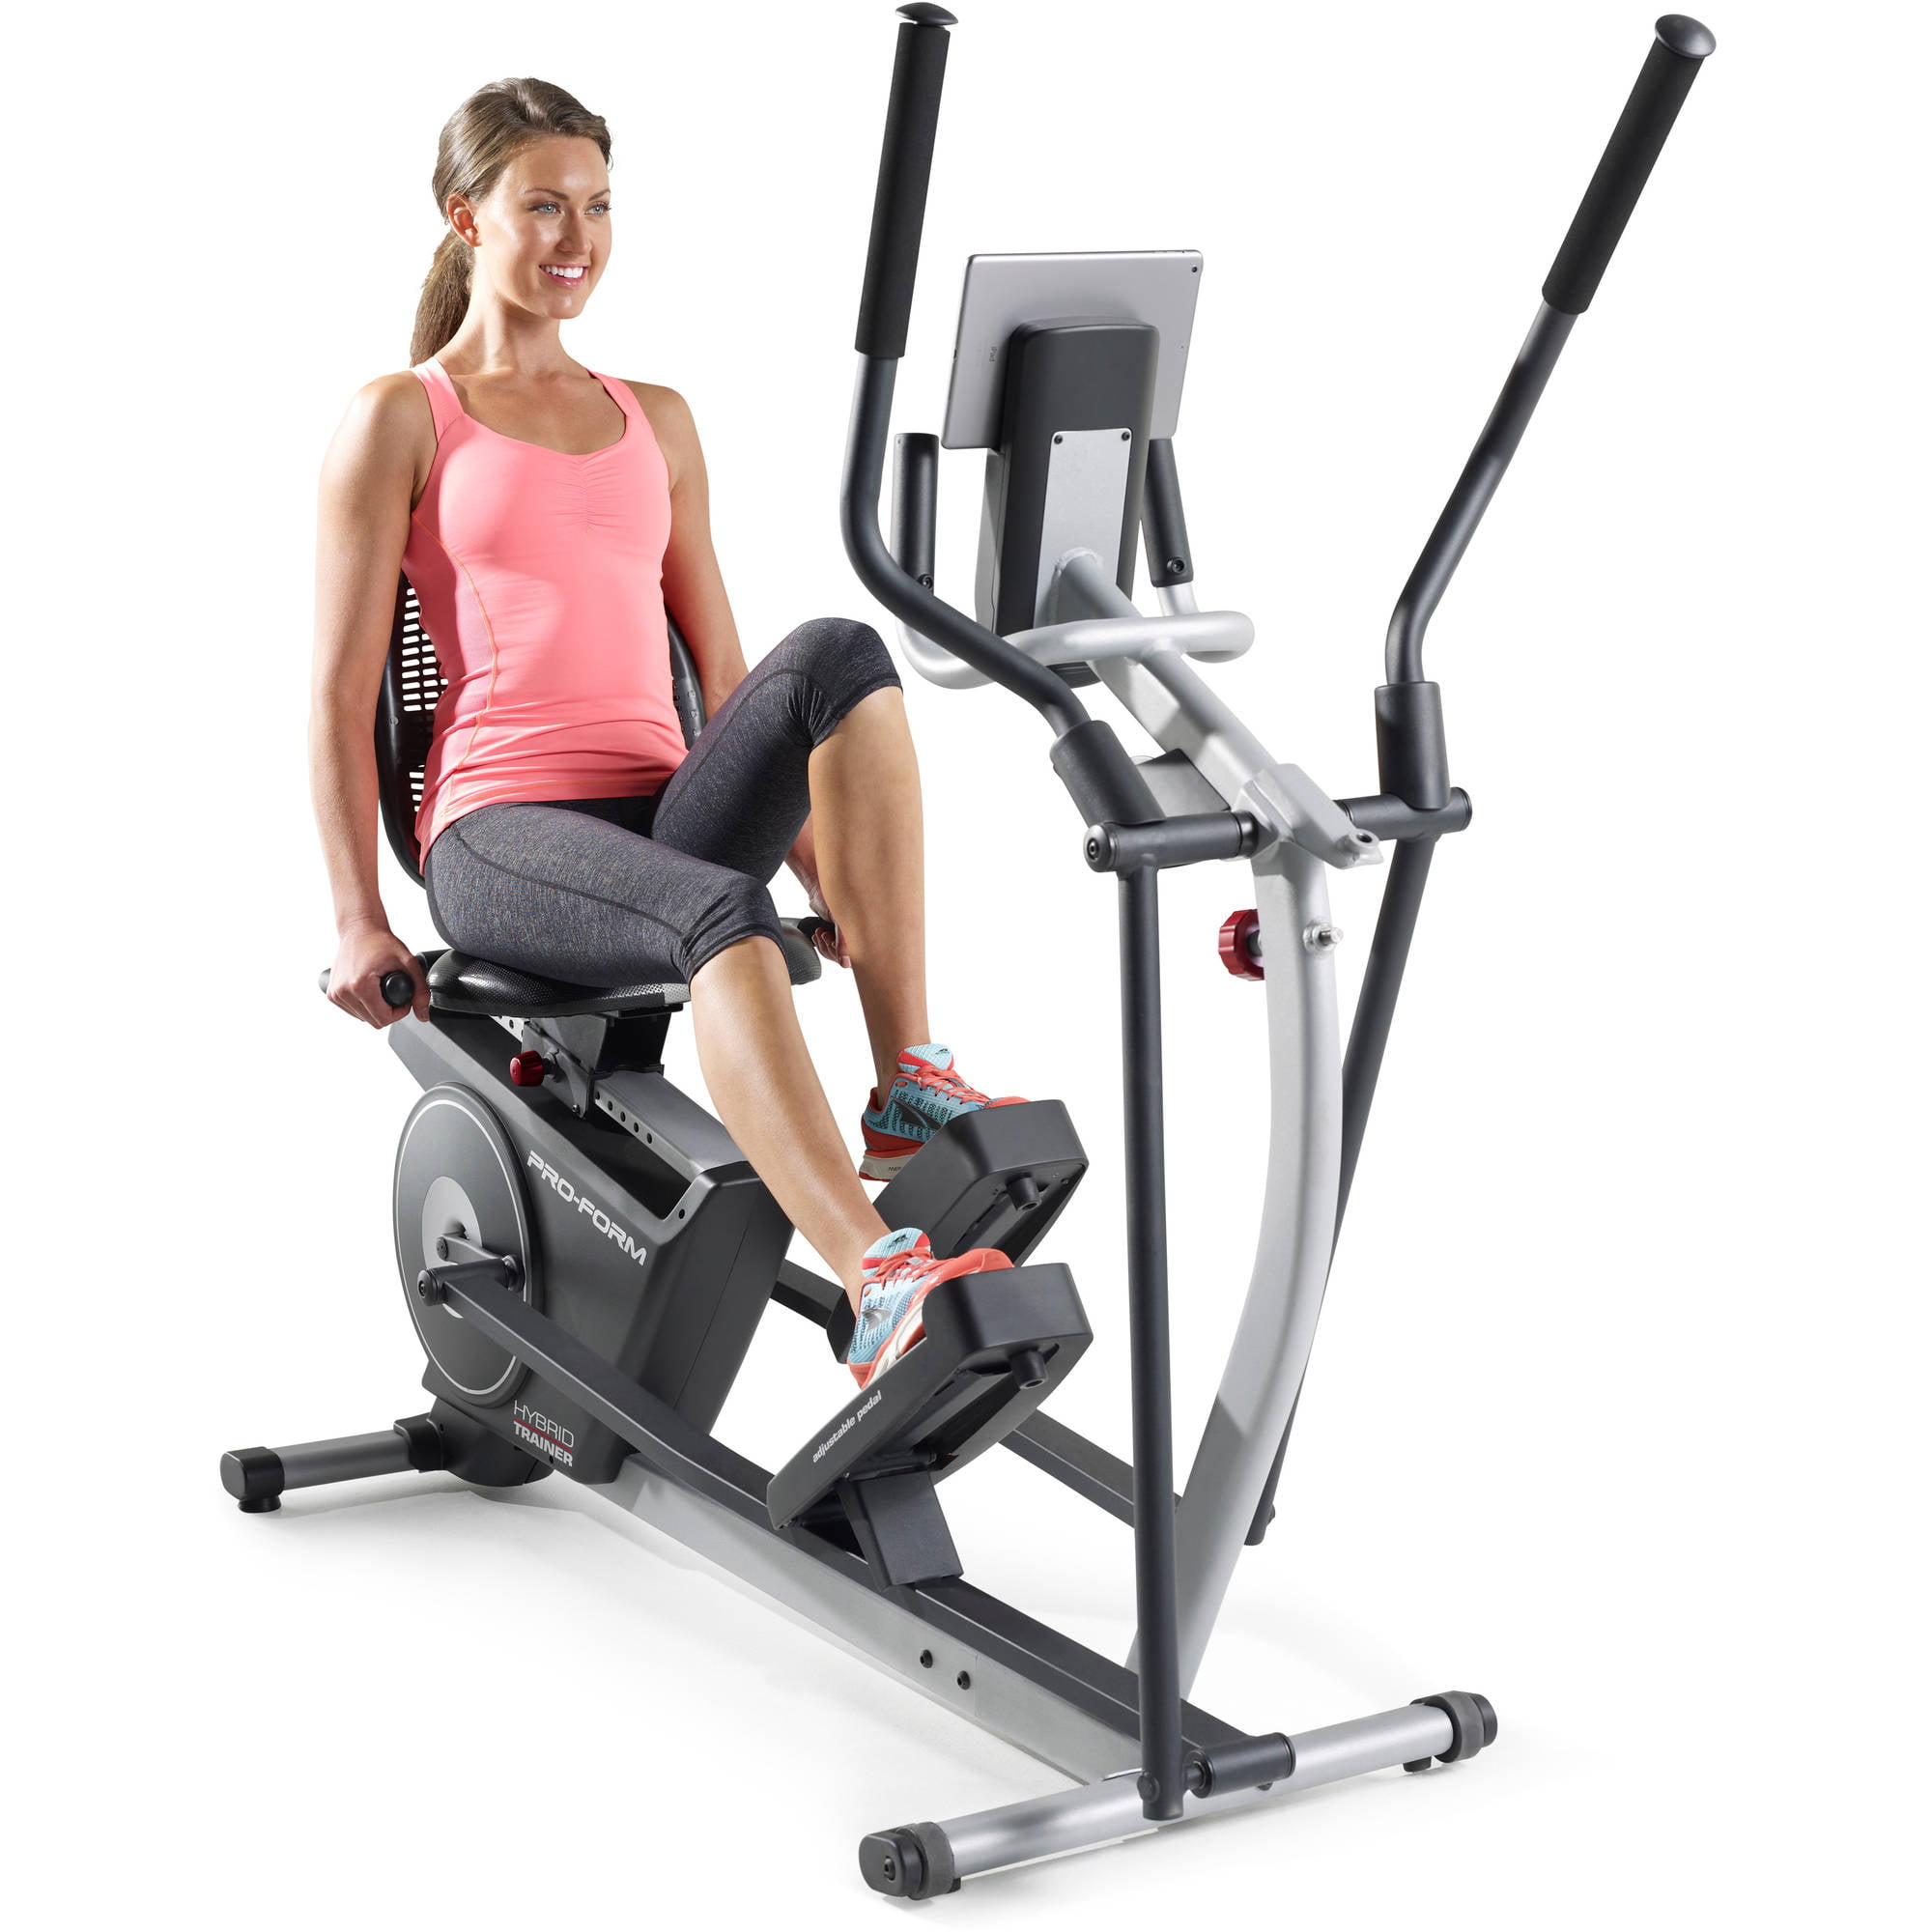 Upright Recumbent 3 in 1  Delivered FREE in apx 3-7 days Elliptical 